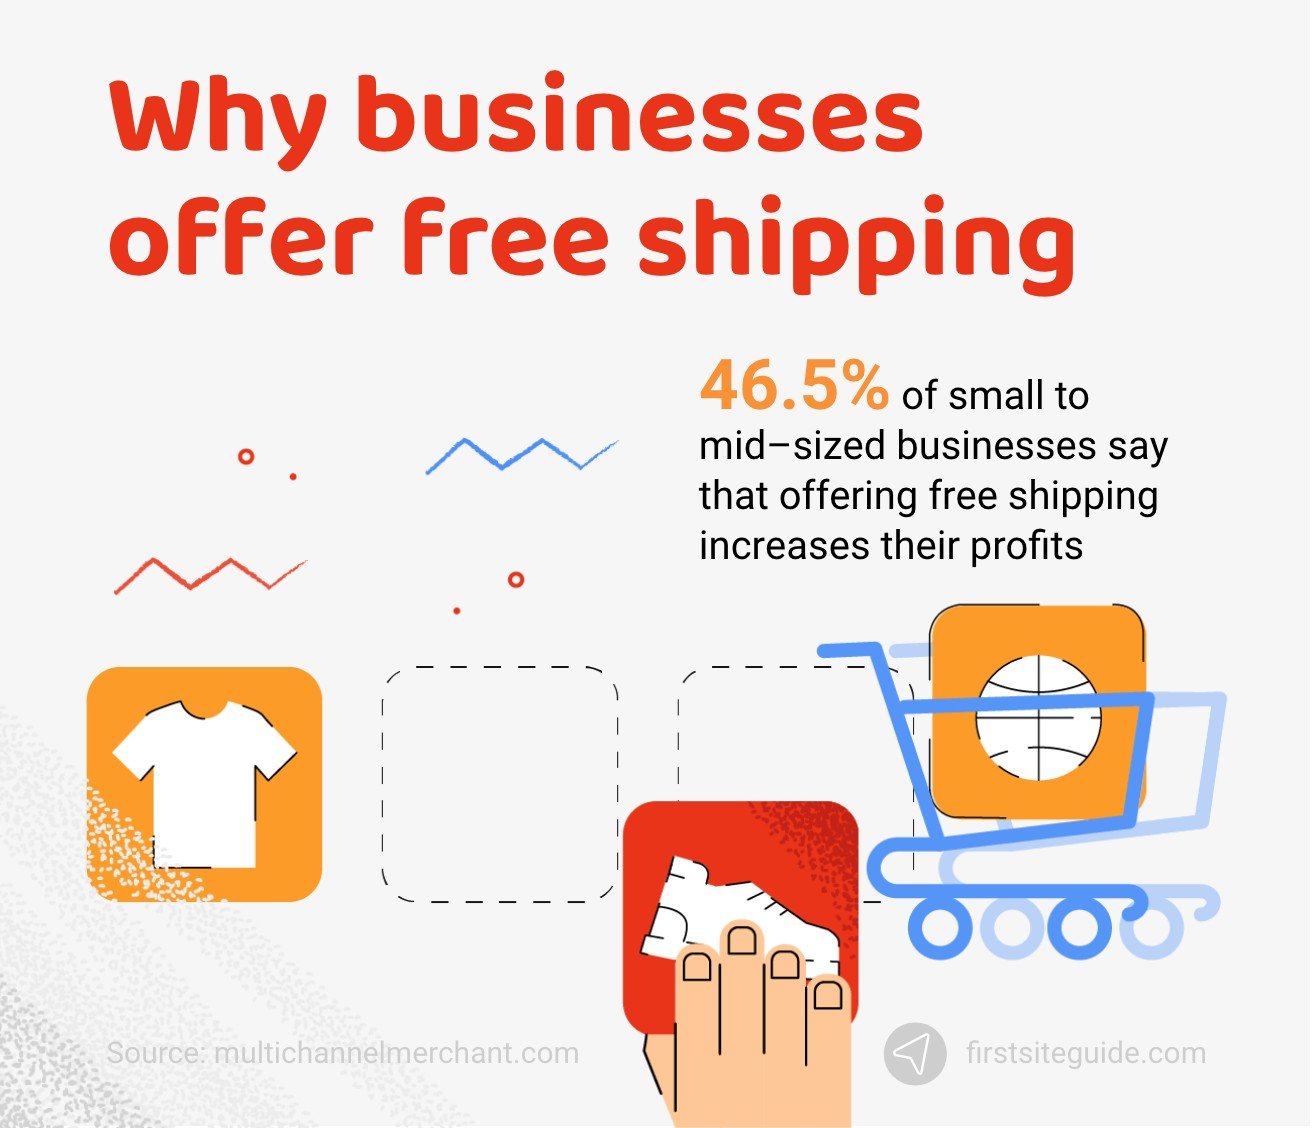 Why businesses offer free shipping